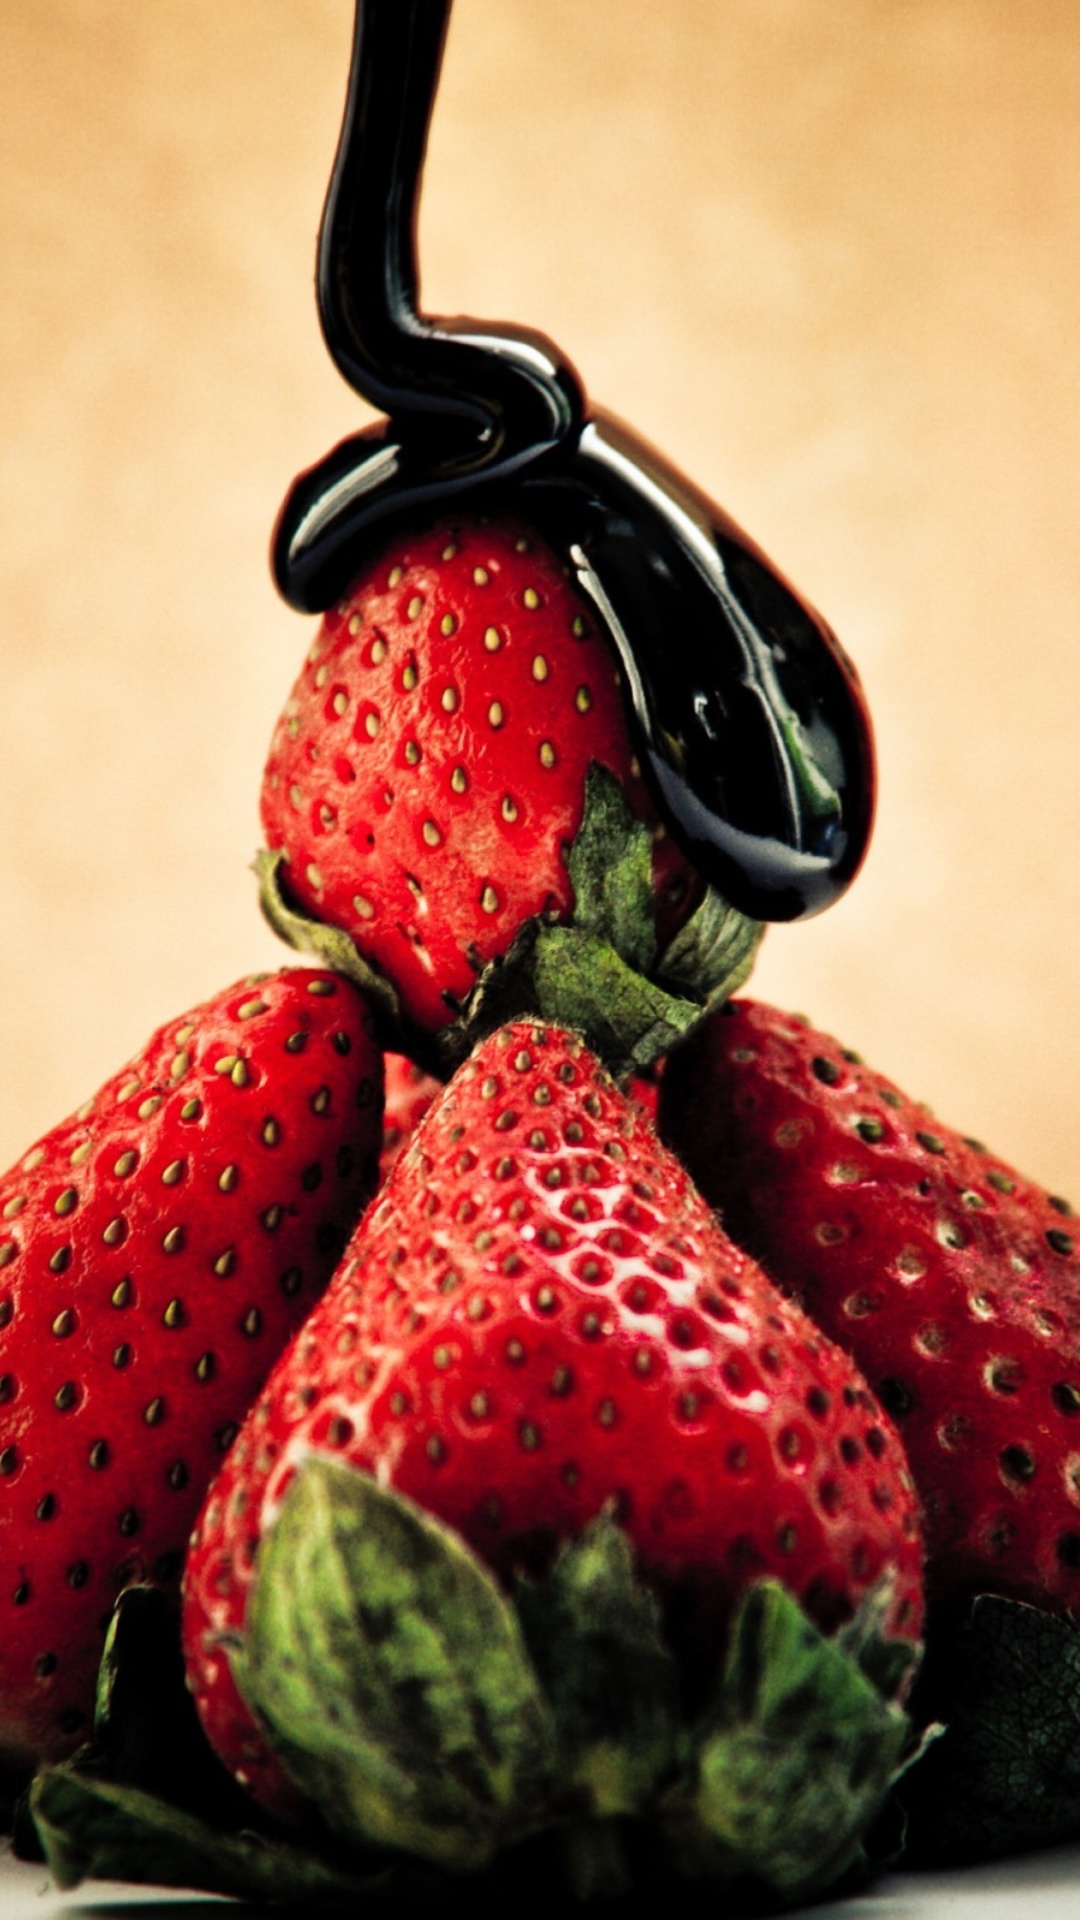 Strawberries with chocolate wallpaper 1080x1920